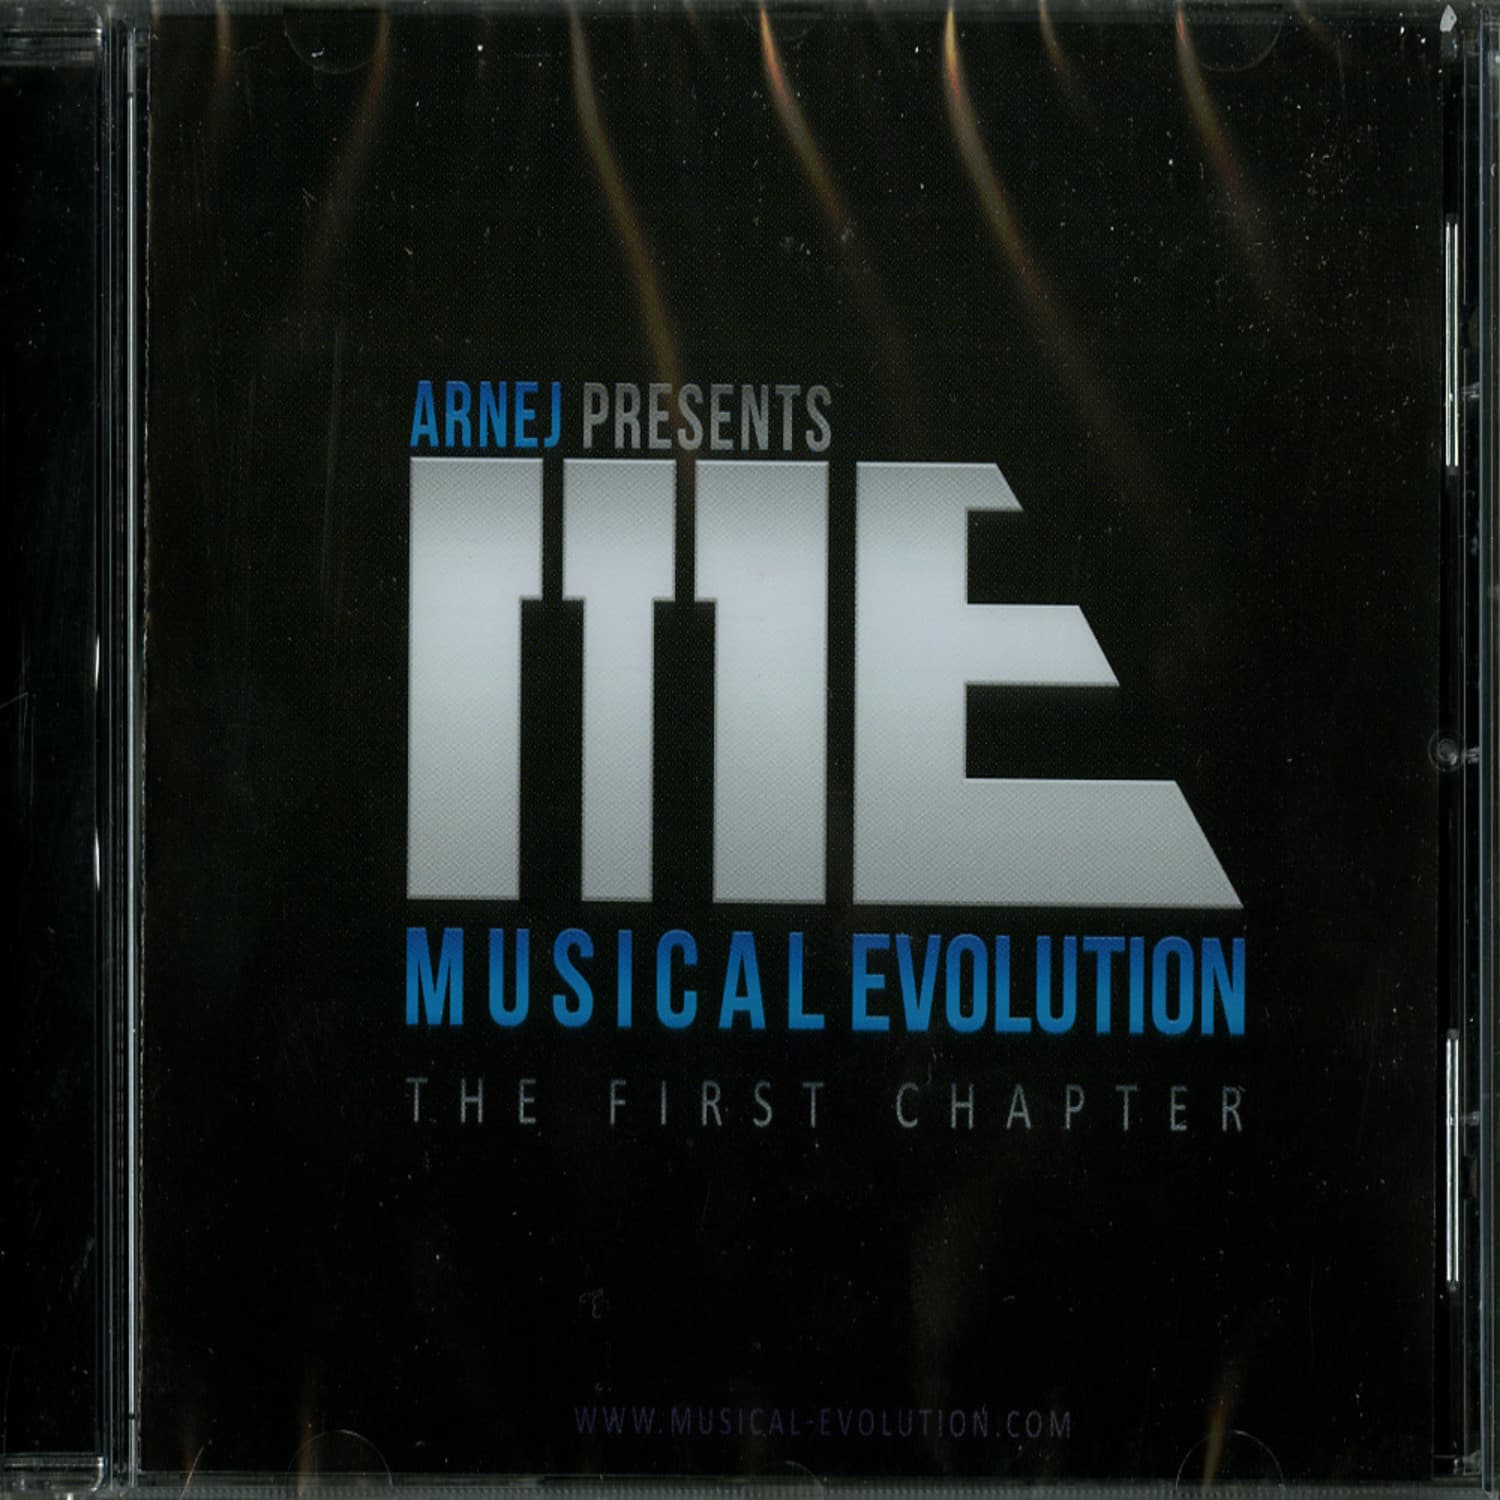 Arnej Presents - MUSICAL EVOLUTION - THE FIRST CHAPTER 